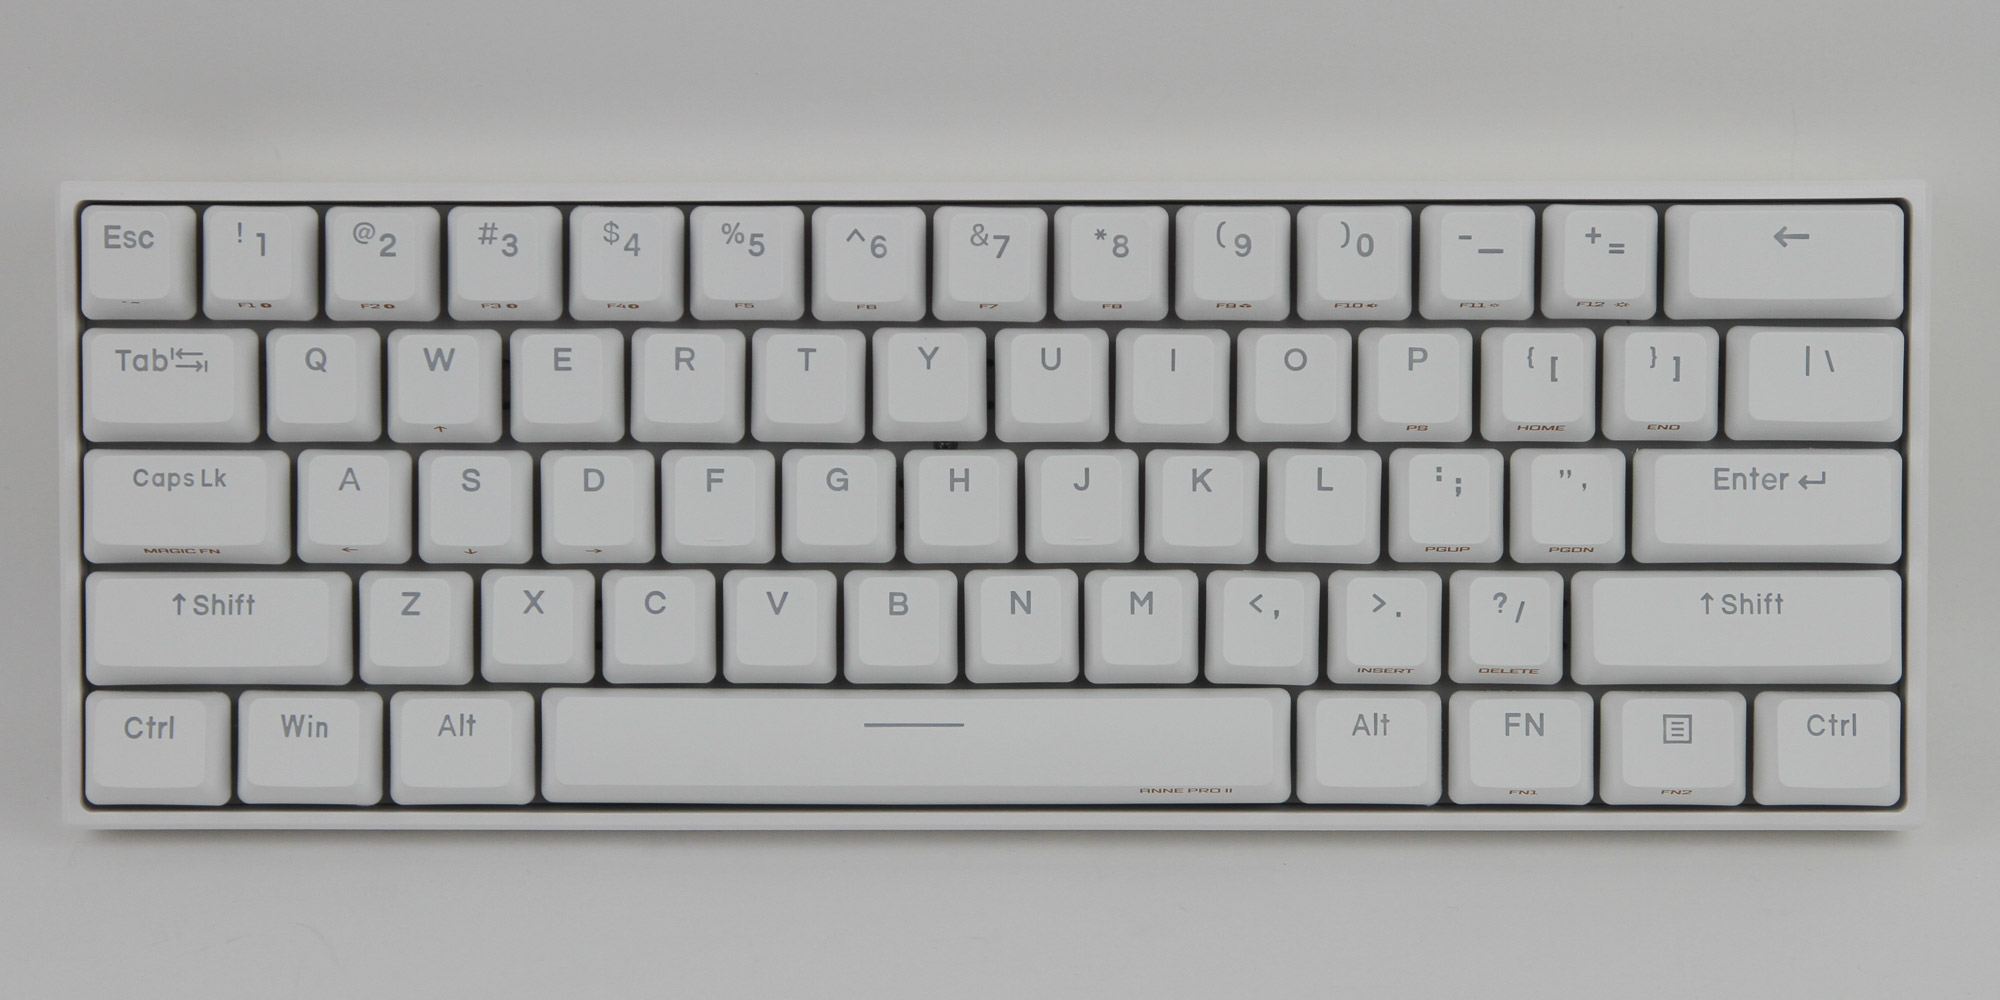 Anne Pro 2 Keyboard Review - Tapping is Key - Closer Examination